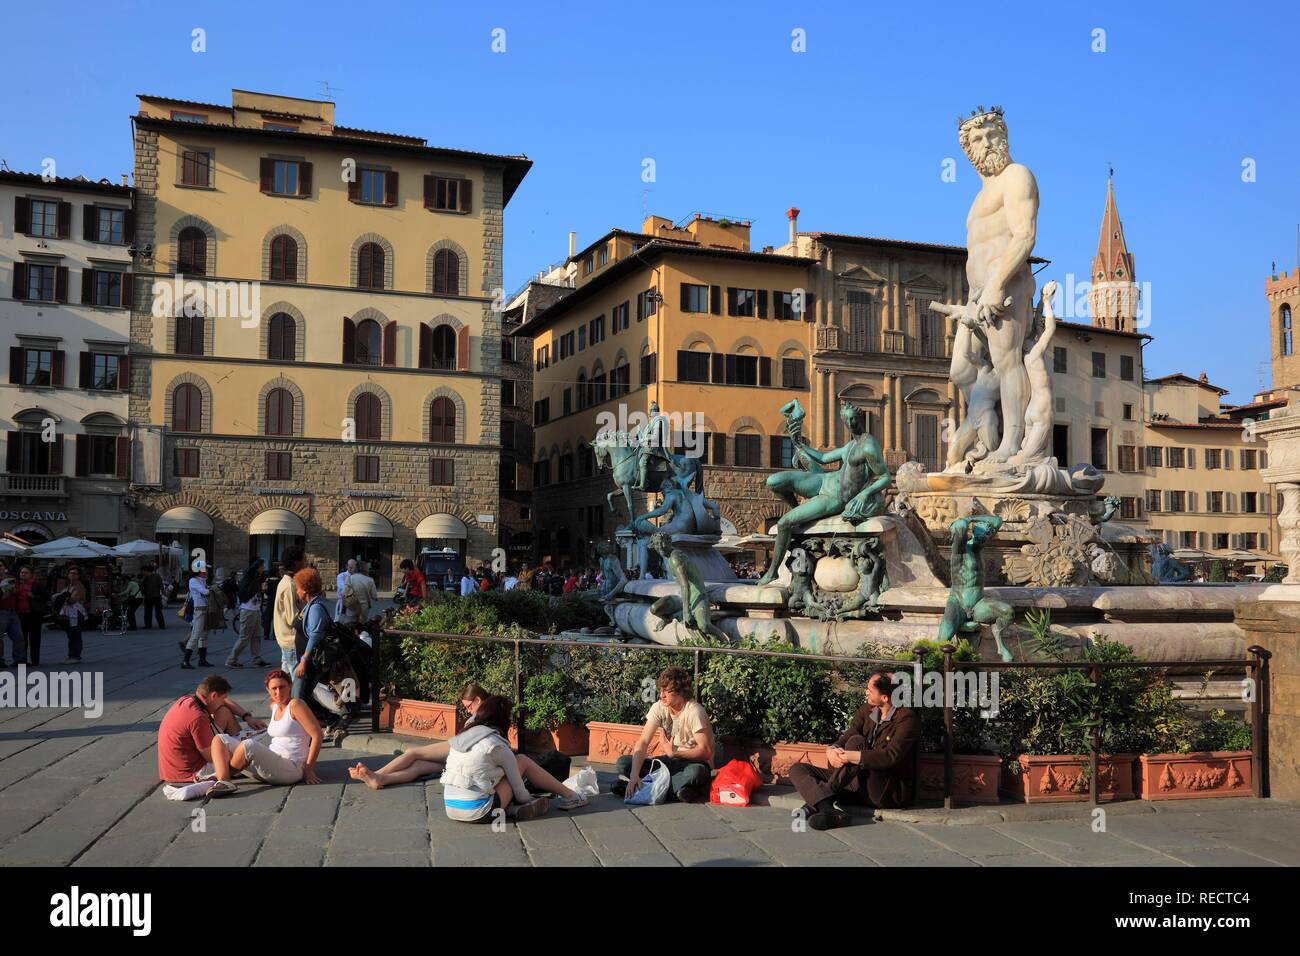 Piazza delle Signoria with the Neptune Ammanatis in Firenze, Florence, Tuscany, Italy, Europe Stock Photo